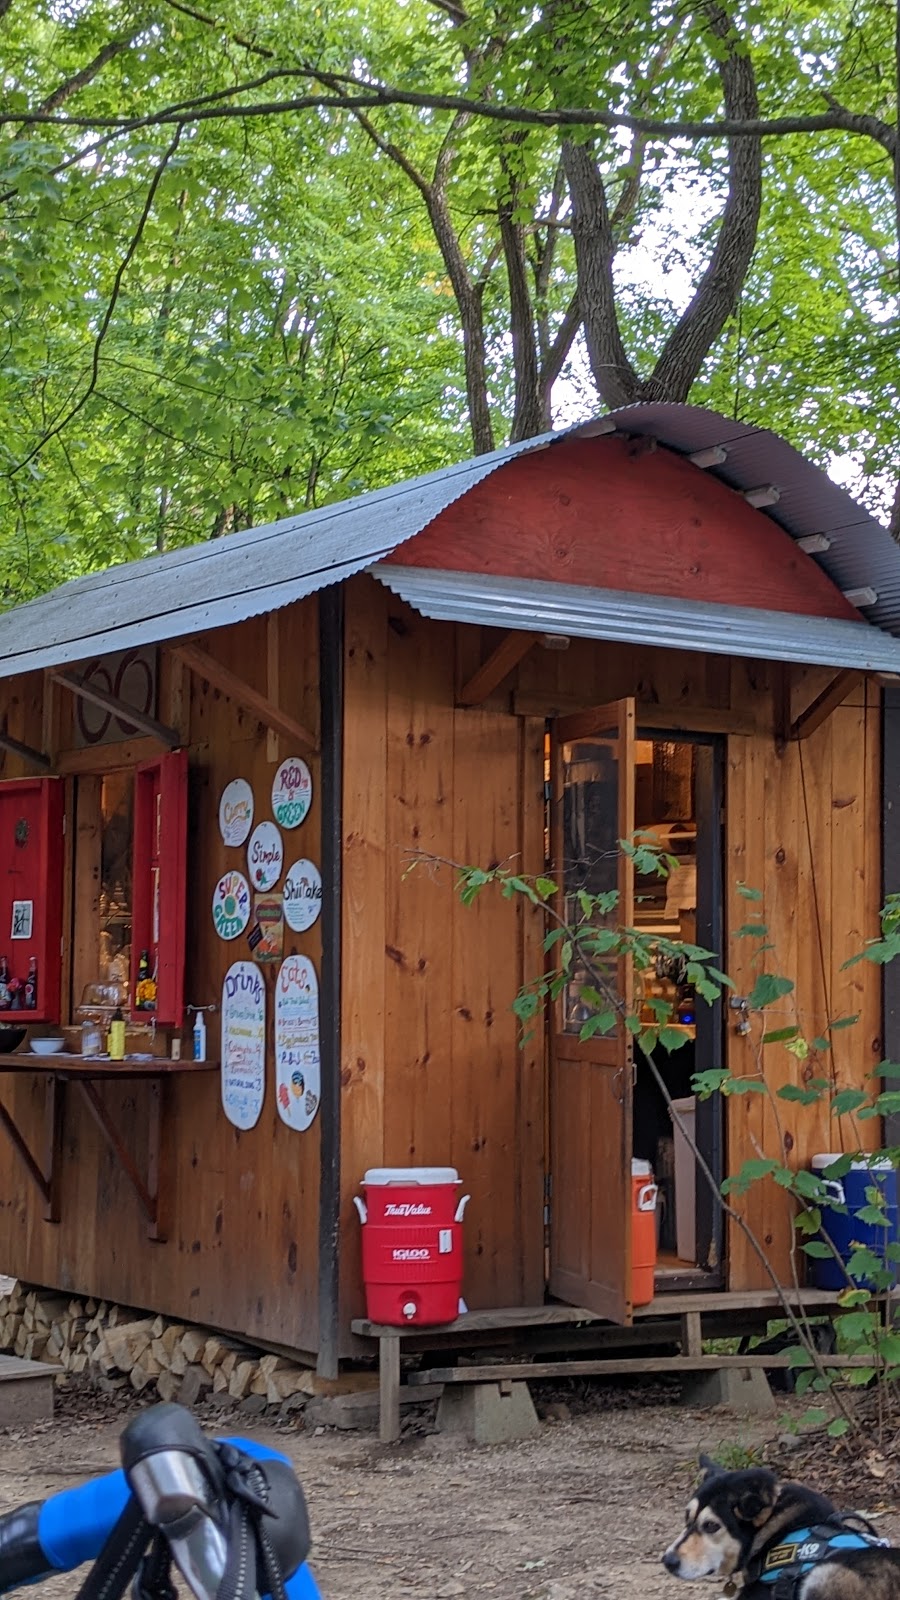 Rail Trail Cafe | 310 River Rd Ext, New Paltz, NY 12561 | Phone: (845) 399-5450